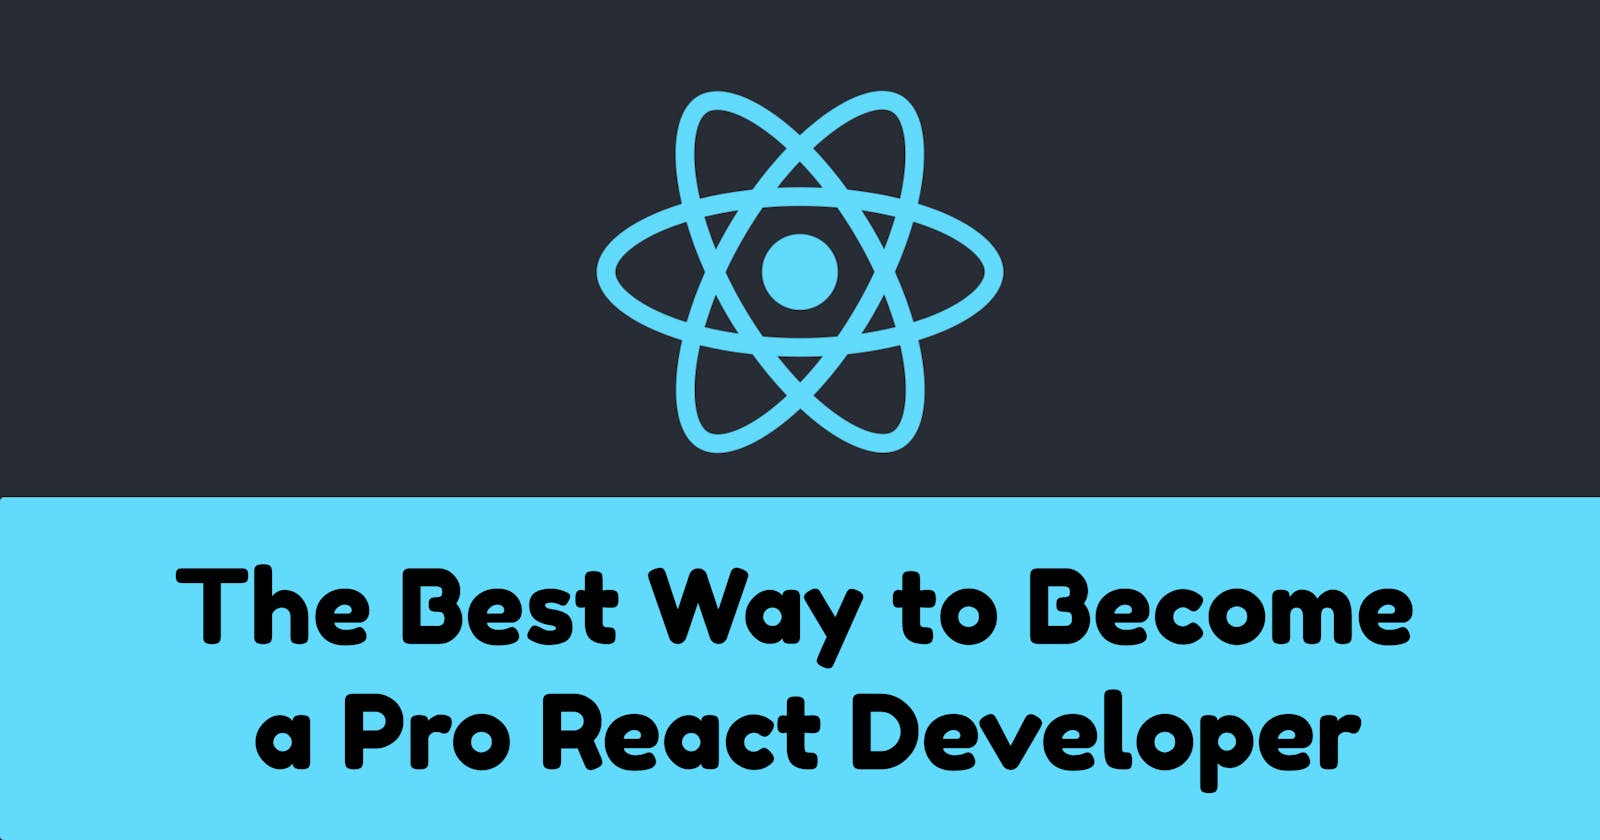 The Best Way to Become a Pro React Developer